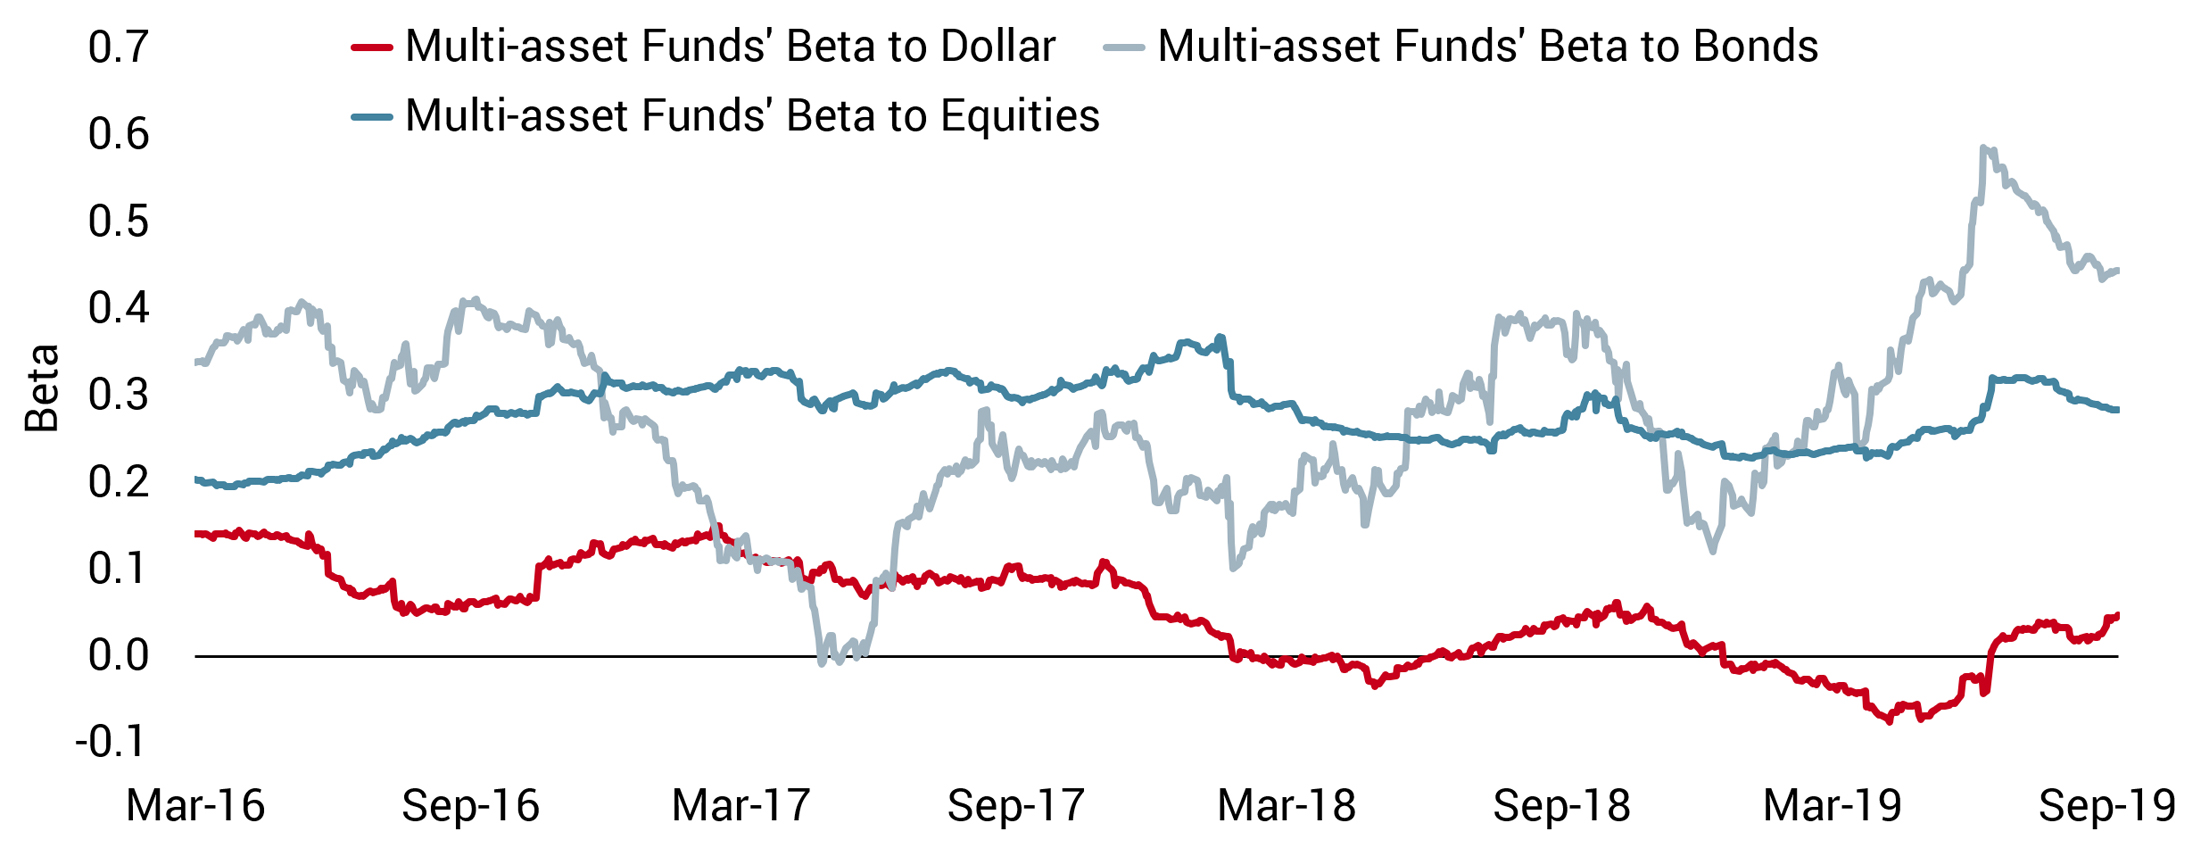 20190927 COTD - Beta of Multi Asset Funds - Web